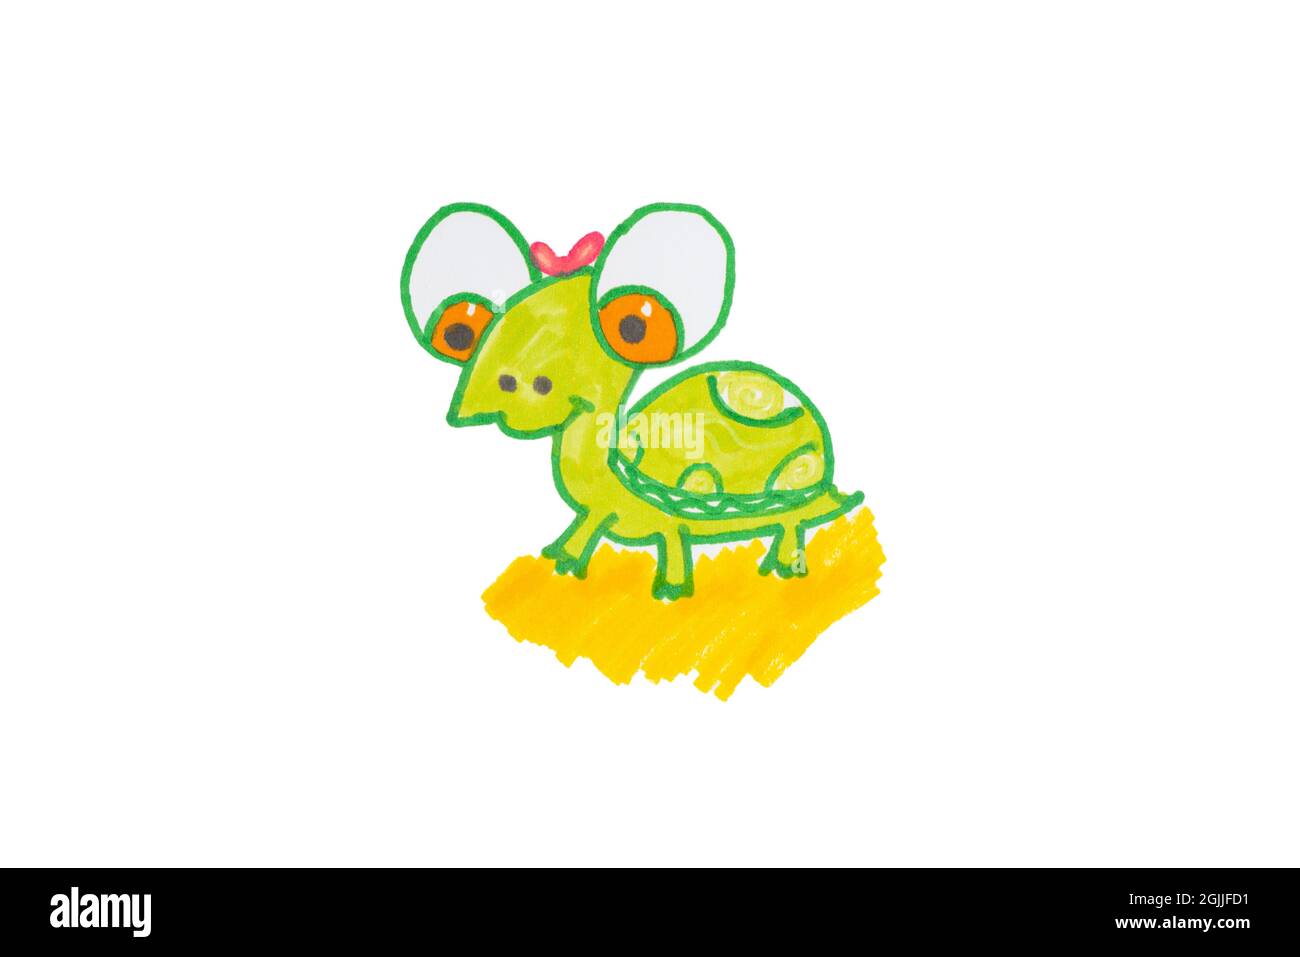 Childrens drawing of a multicolored turtle on a white background isolad.Childs picture. Fair story. Stock Photo